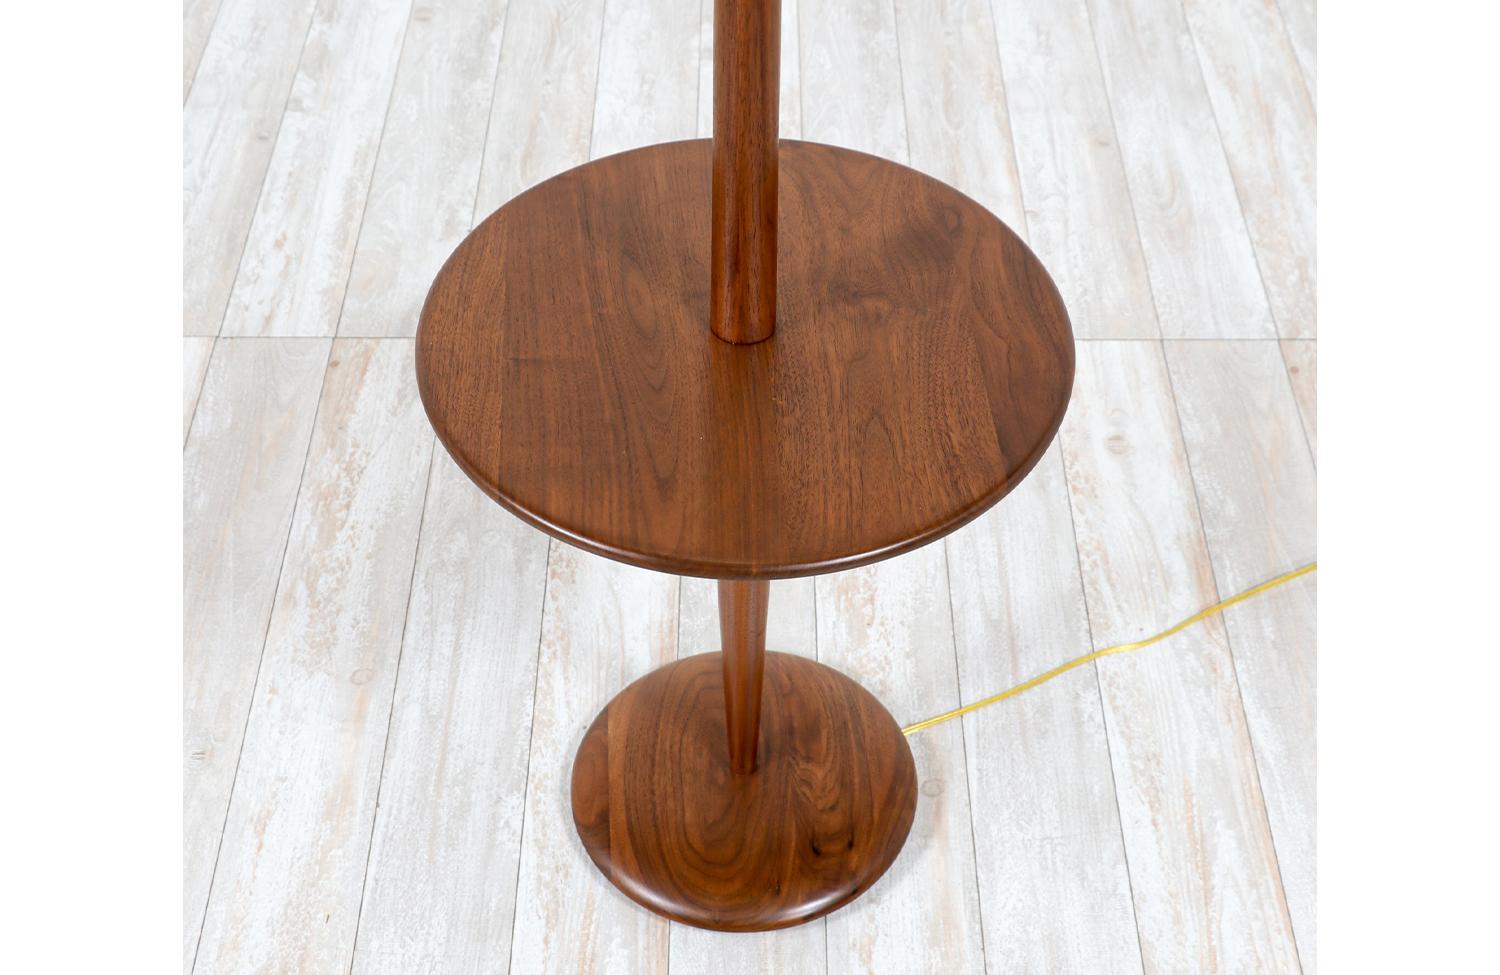 Mid-20th Century Vintage Sculpted Walnut Floor Lamp with Side Table by Laurel